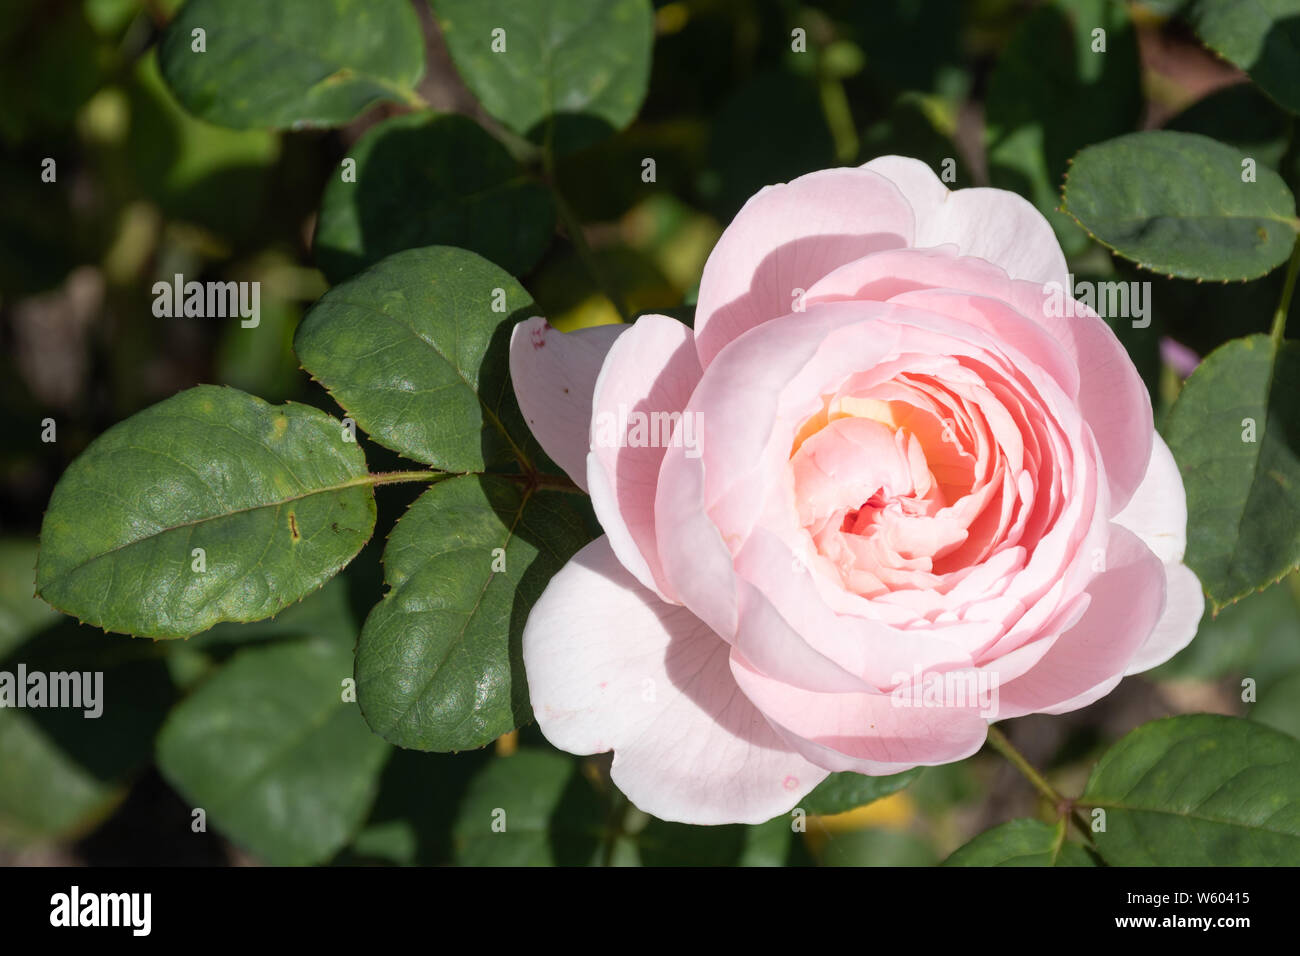 Queen of Sweden variety of English rose (Rosa austiger) bred by David Austin - close-up of pale pink flower. Stock Photo